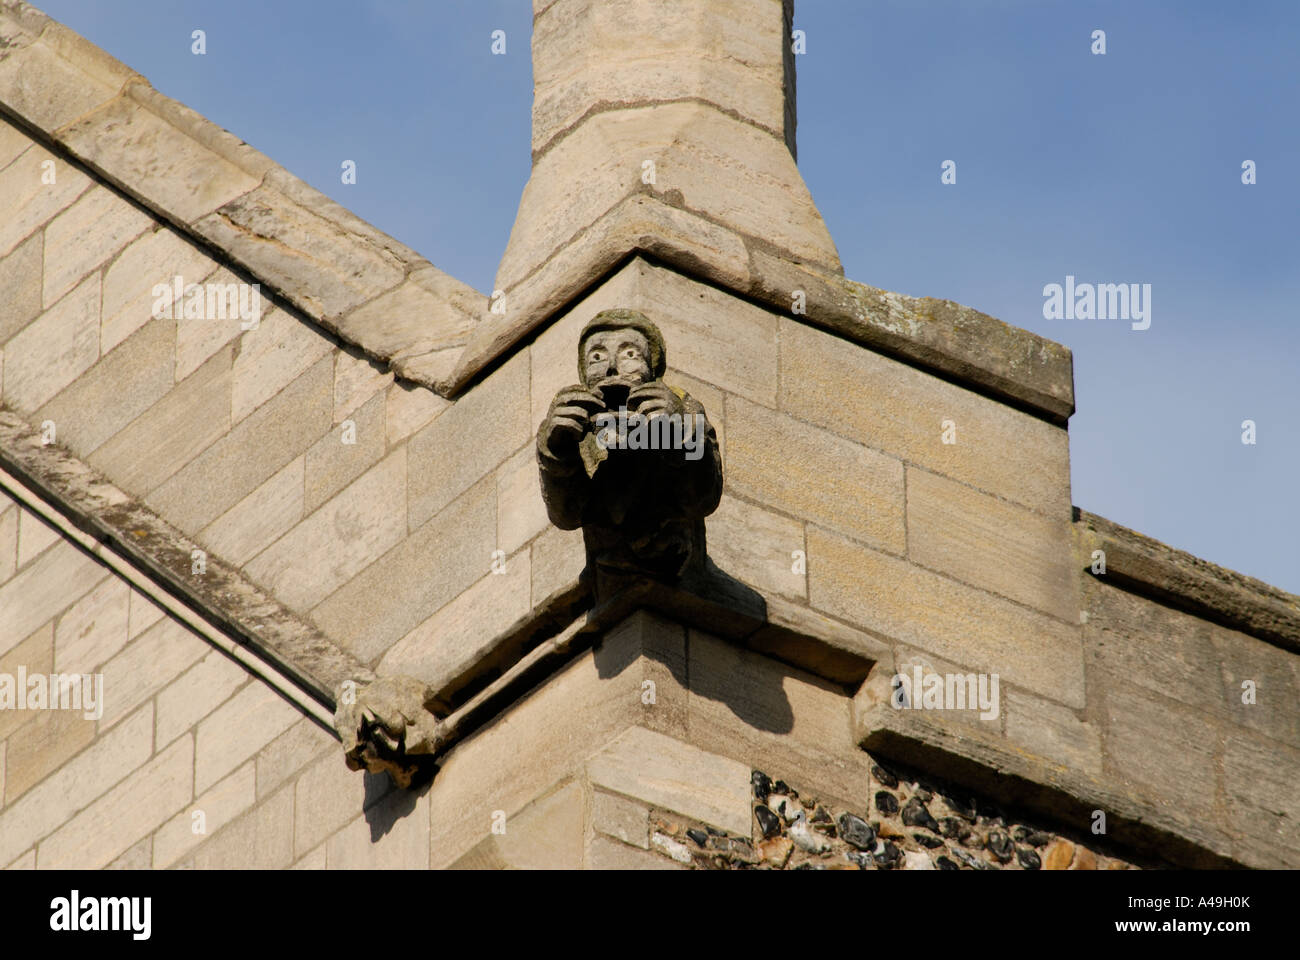 Gargoyle in the form a priest pulling a face on The brand new tower of the new gothic revival Bury St Edmunds Cathedral Stock Photo